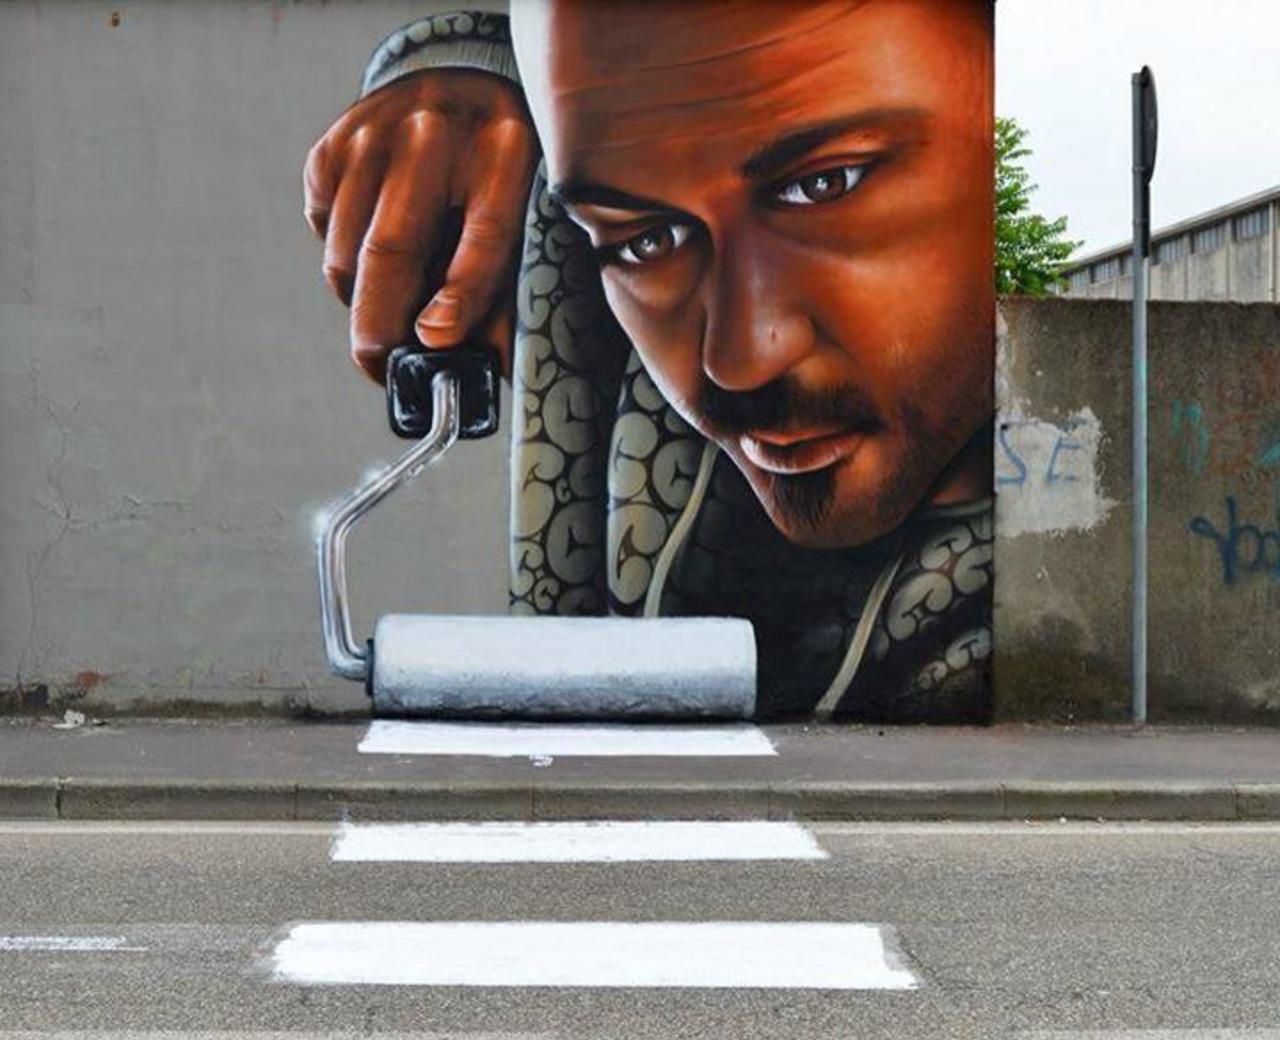 Great placement in this clever Street Art piece by Cheone in Italy 

#art #arte #graffiti #streetart http://t.co/mKINTBAn4Y